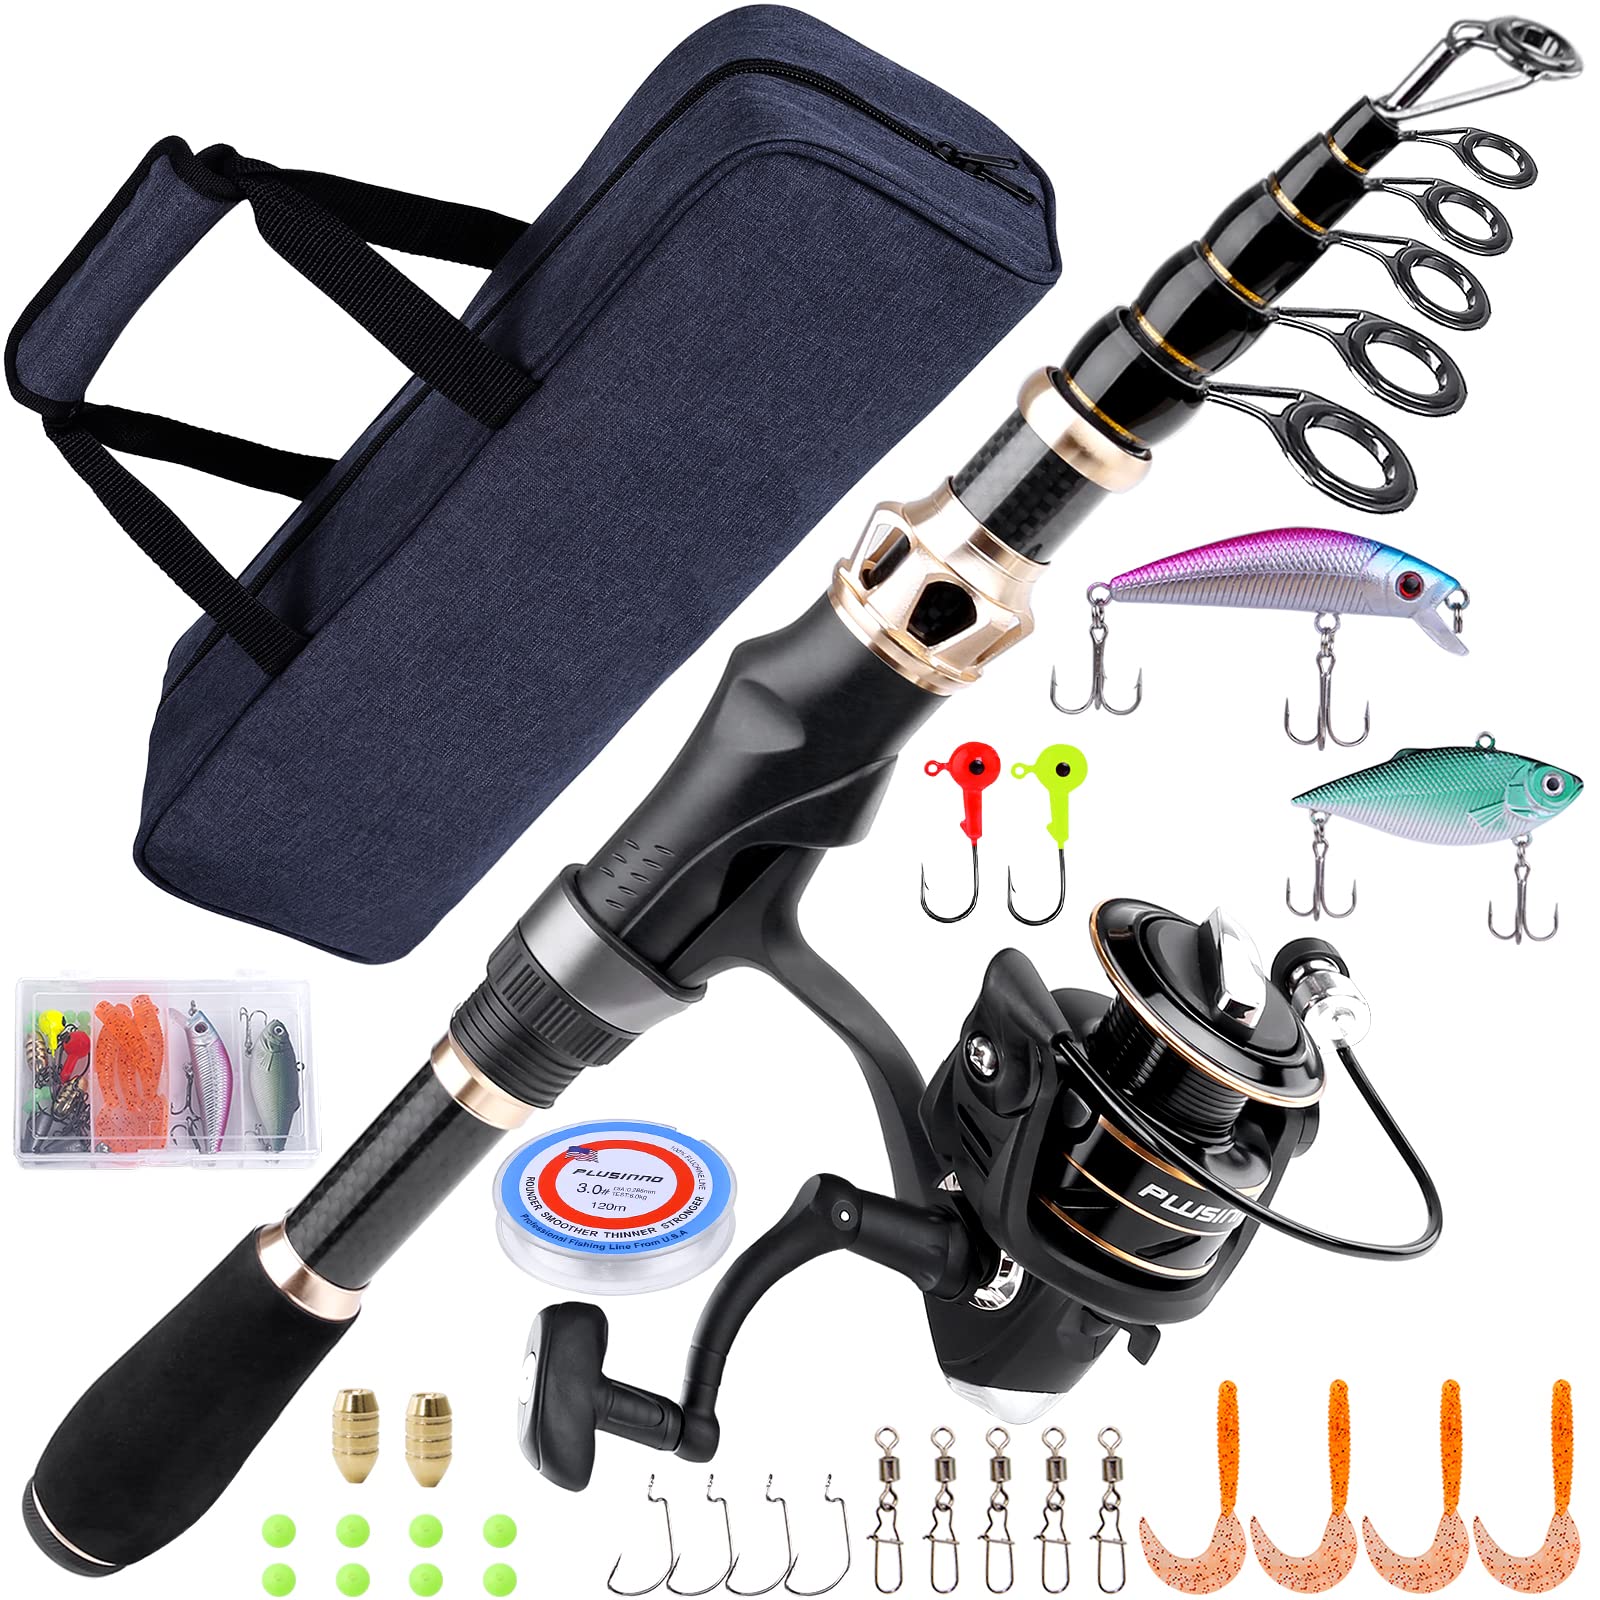 Cergrey Fishing Pole,outdoor Fishing Equipment,portable Fishing Pole Set Telescopic Fishing Rod Reel Combos Kit Accessory For Outdoor Fishing